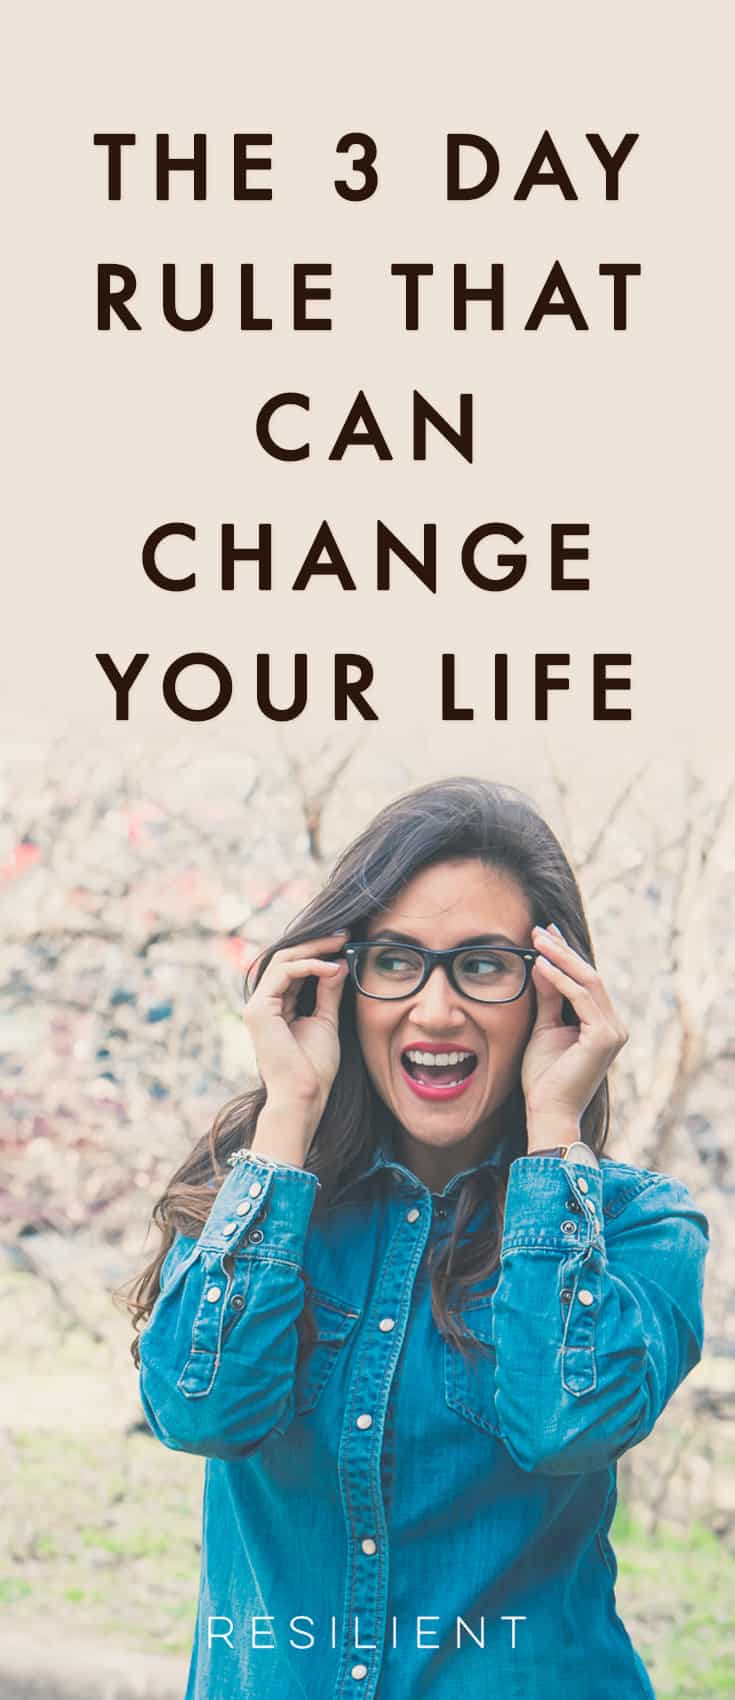 Do you ever find yourself falling victim to bad habits or patterns when you're feeling impulsive? Here's the 3 day rule that can change your life. #selfhelp #personaldevelopment #growth #lifeadvice #personalgrowth #mentalhealth #wellness #selfgrowth #changeyourlife